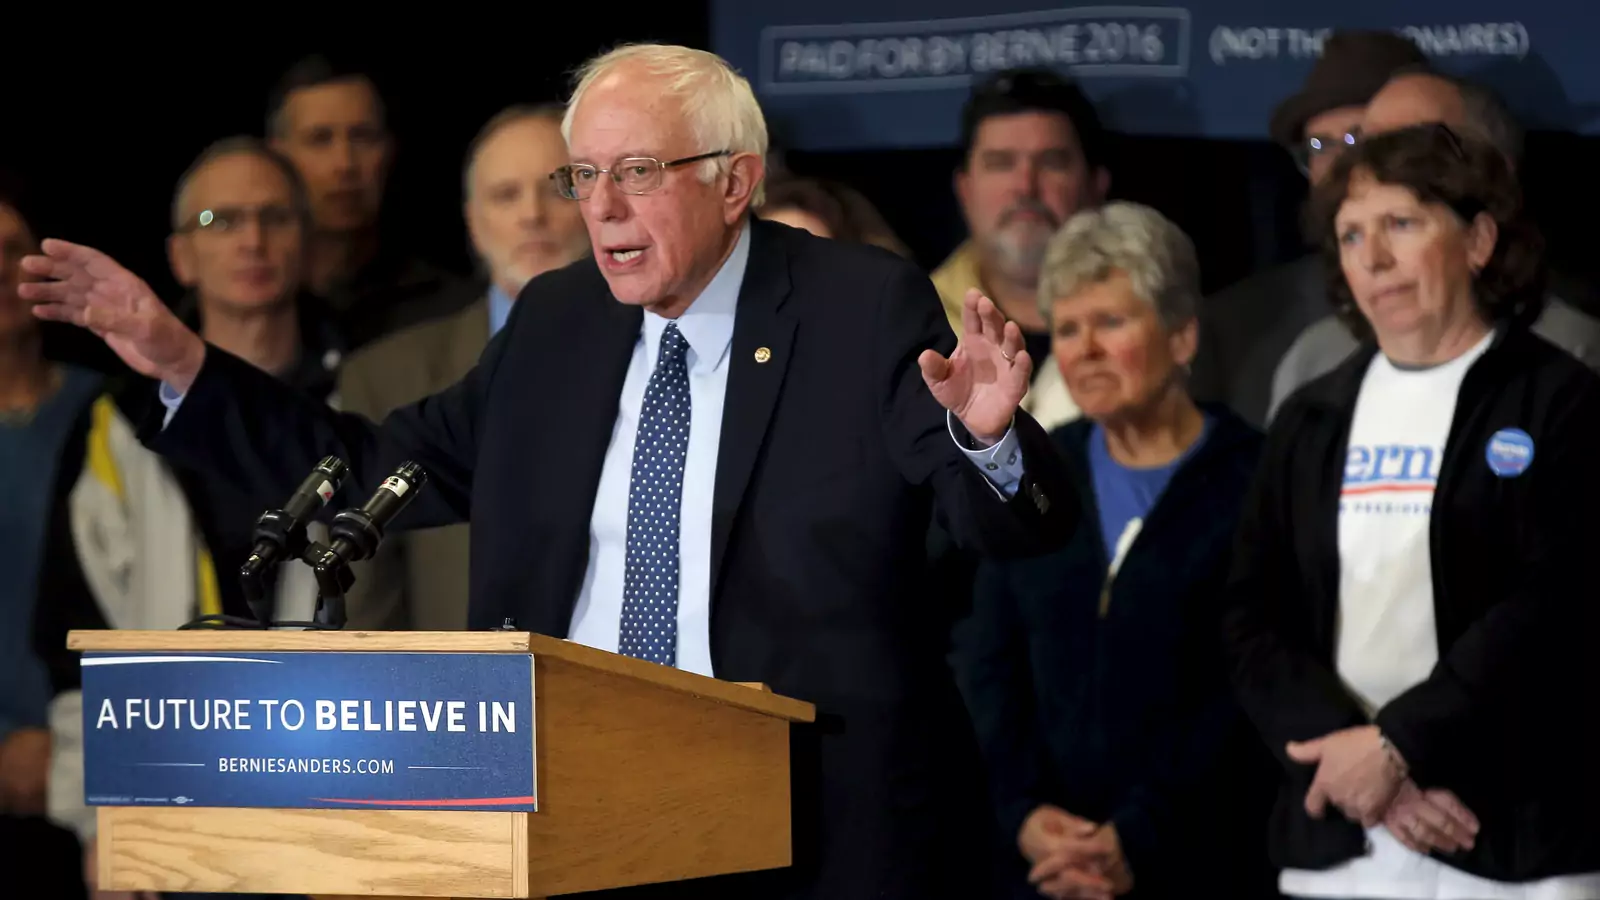 U.S. Democratic presidential candidate Bernie Sanders speaks at a news conference where he spoke about his opposition to the Trans-Pacific Partnership in Concord, New Hampshire, February 3, 2016.